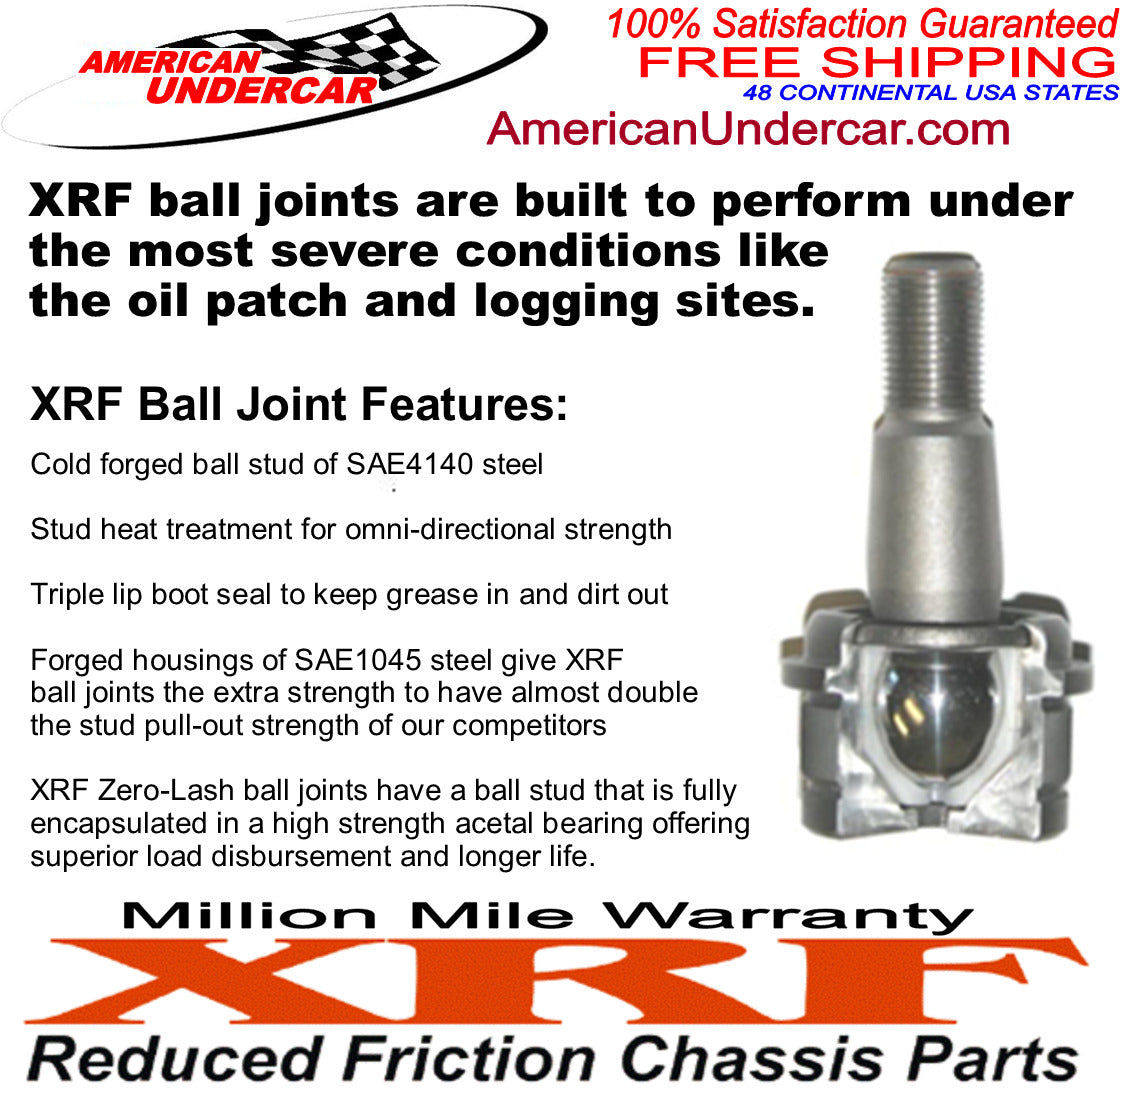 XRF Ball Joints Upper Control Arms & Bushings Kit for 1999-2007 Chevrolet, GMC, Cadillac 2WD, 4x4